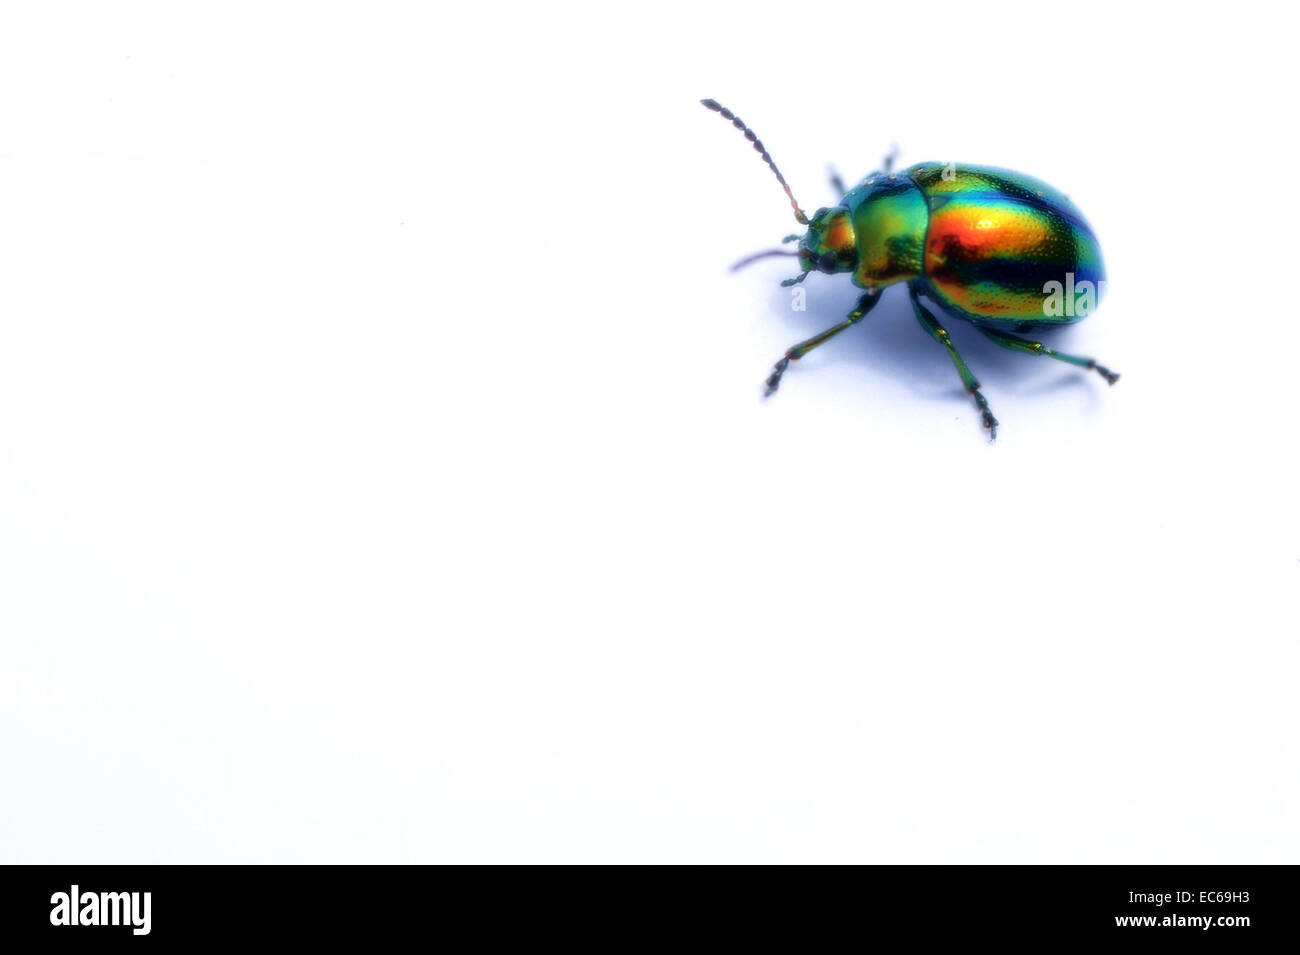 Colored beetle Stock Photo